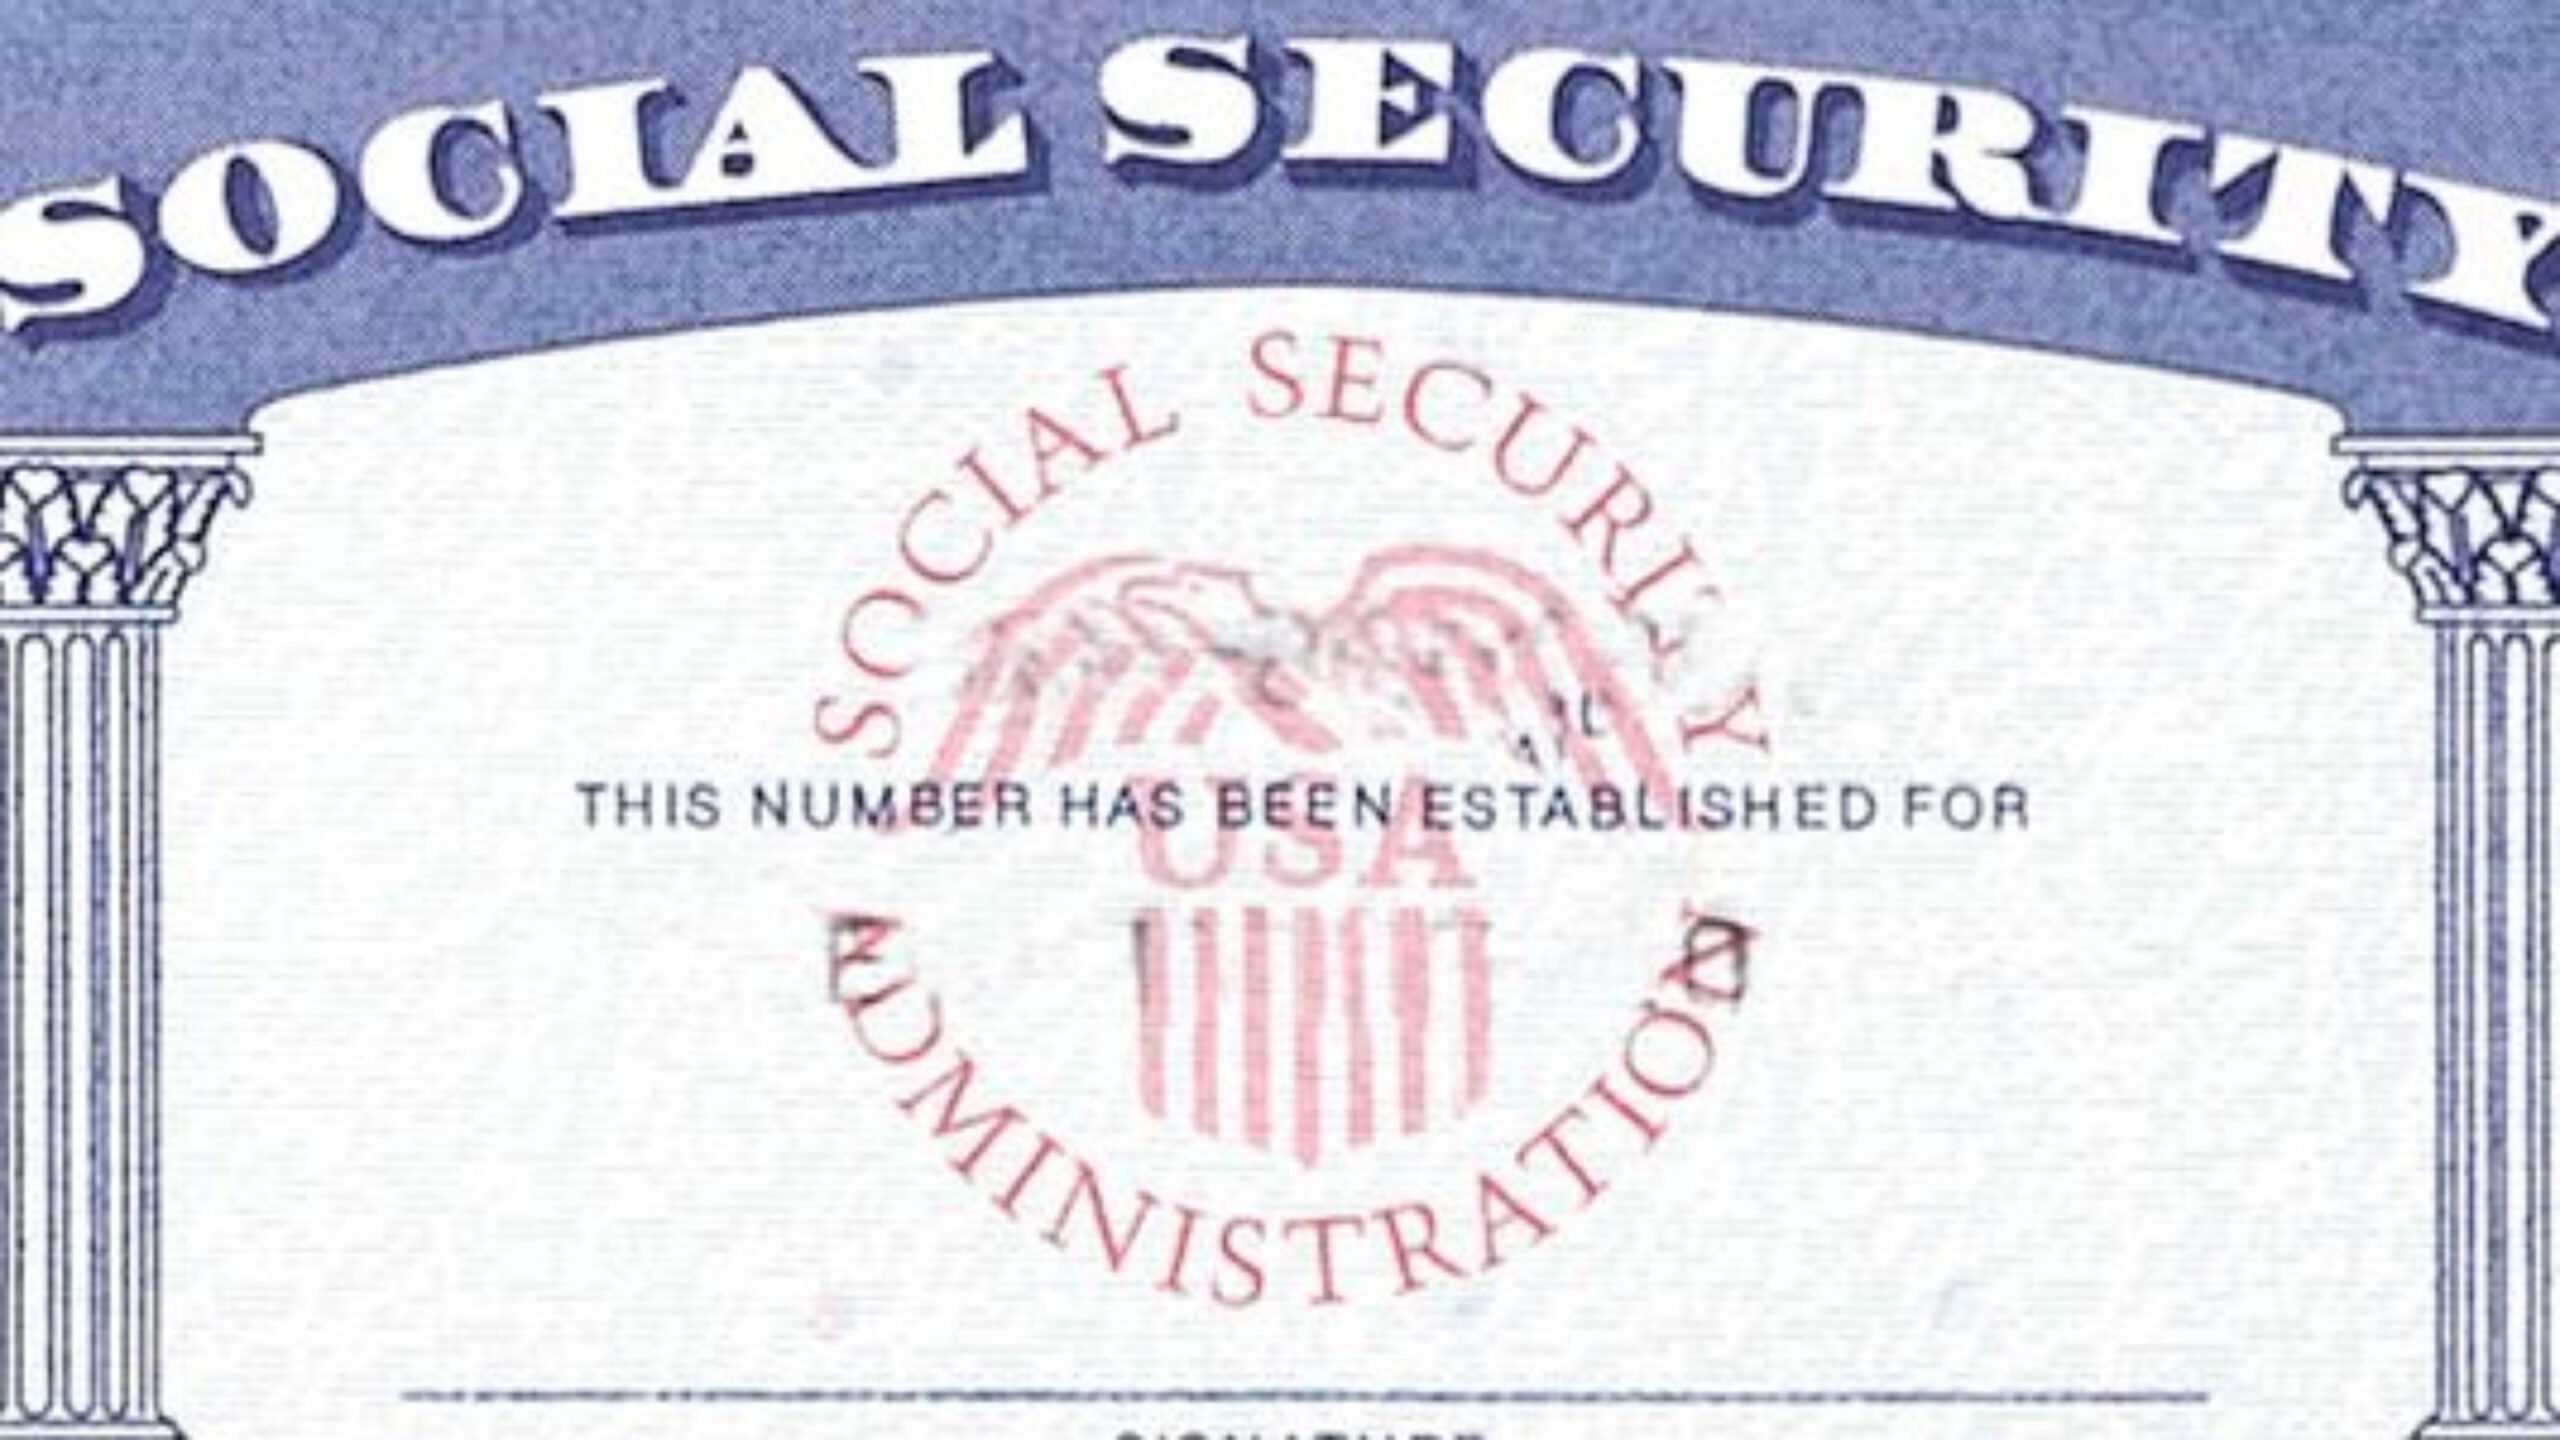 Blank Social Security Card Template Download - Great Intended For Blank Social Security Card Template Download